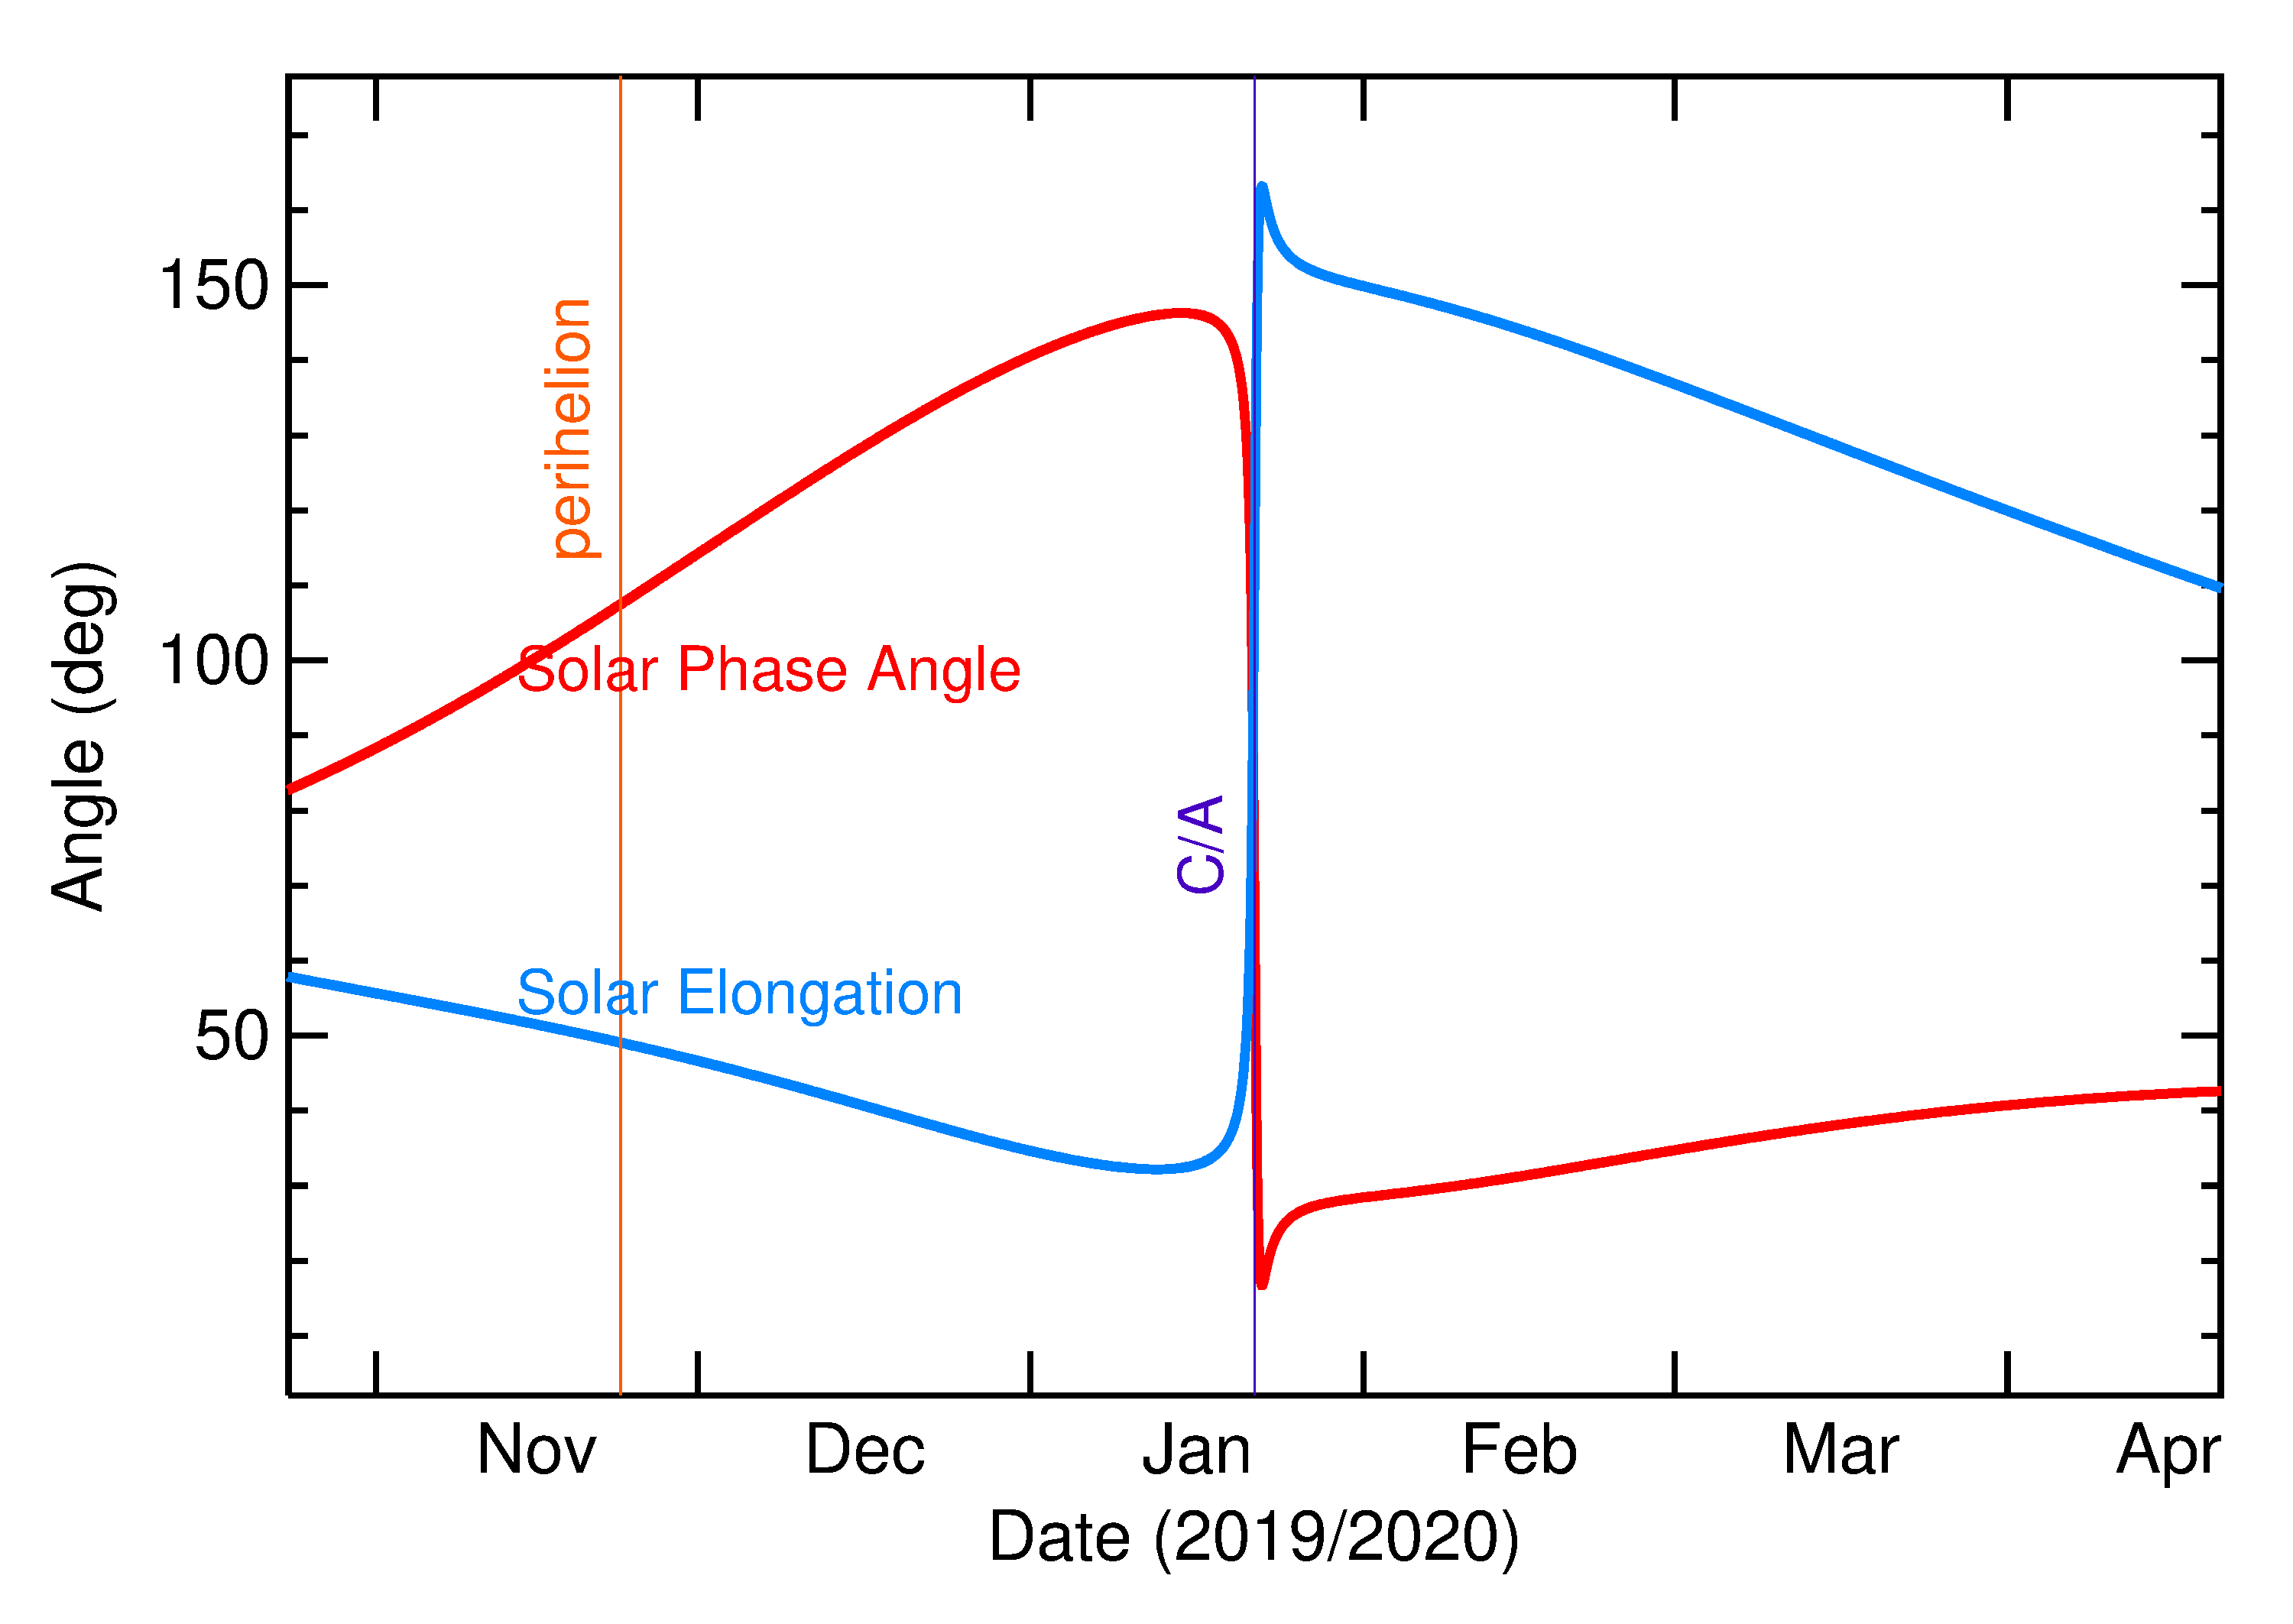 Solar Elongation and Solar Phase Angle of 2020 BK3 in the months around closest approach